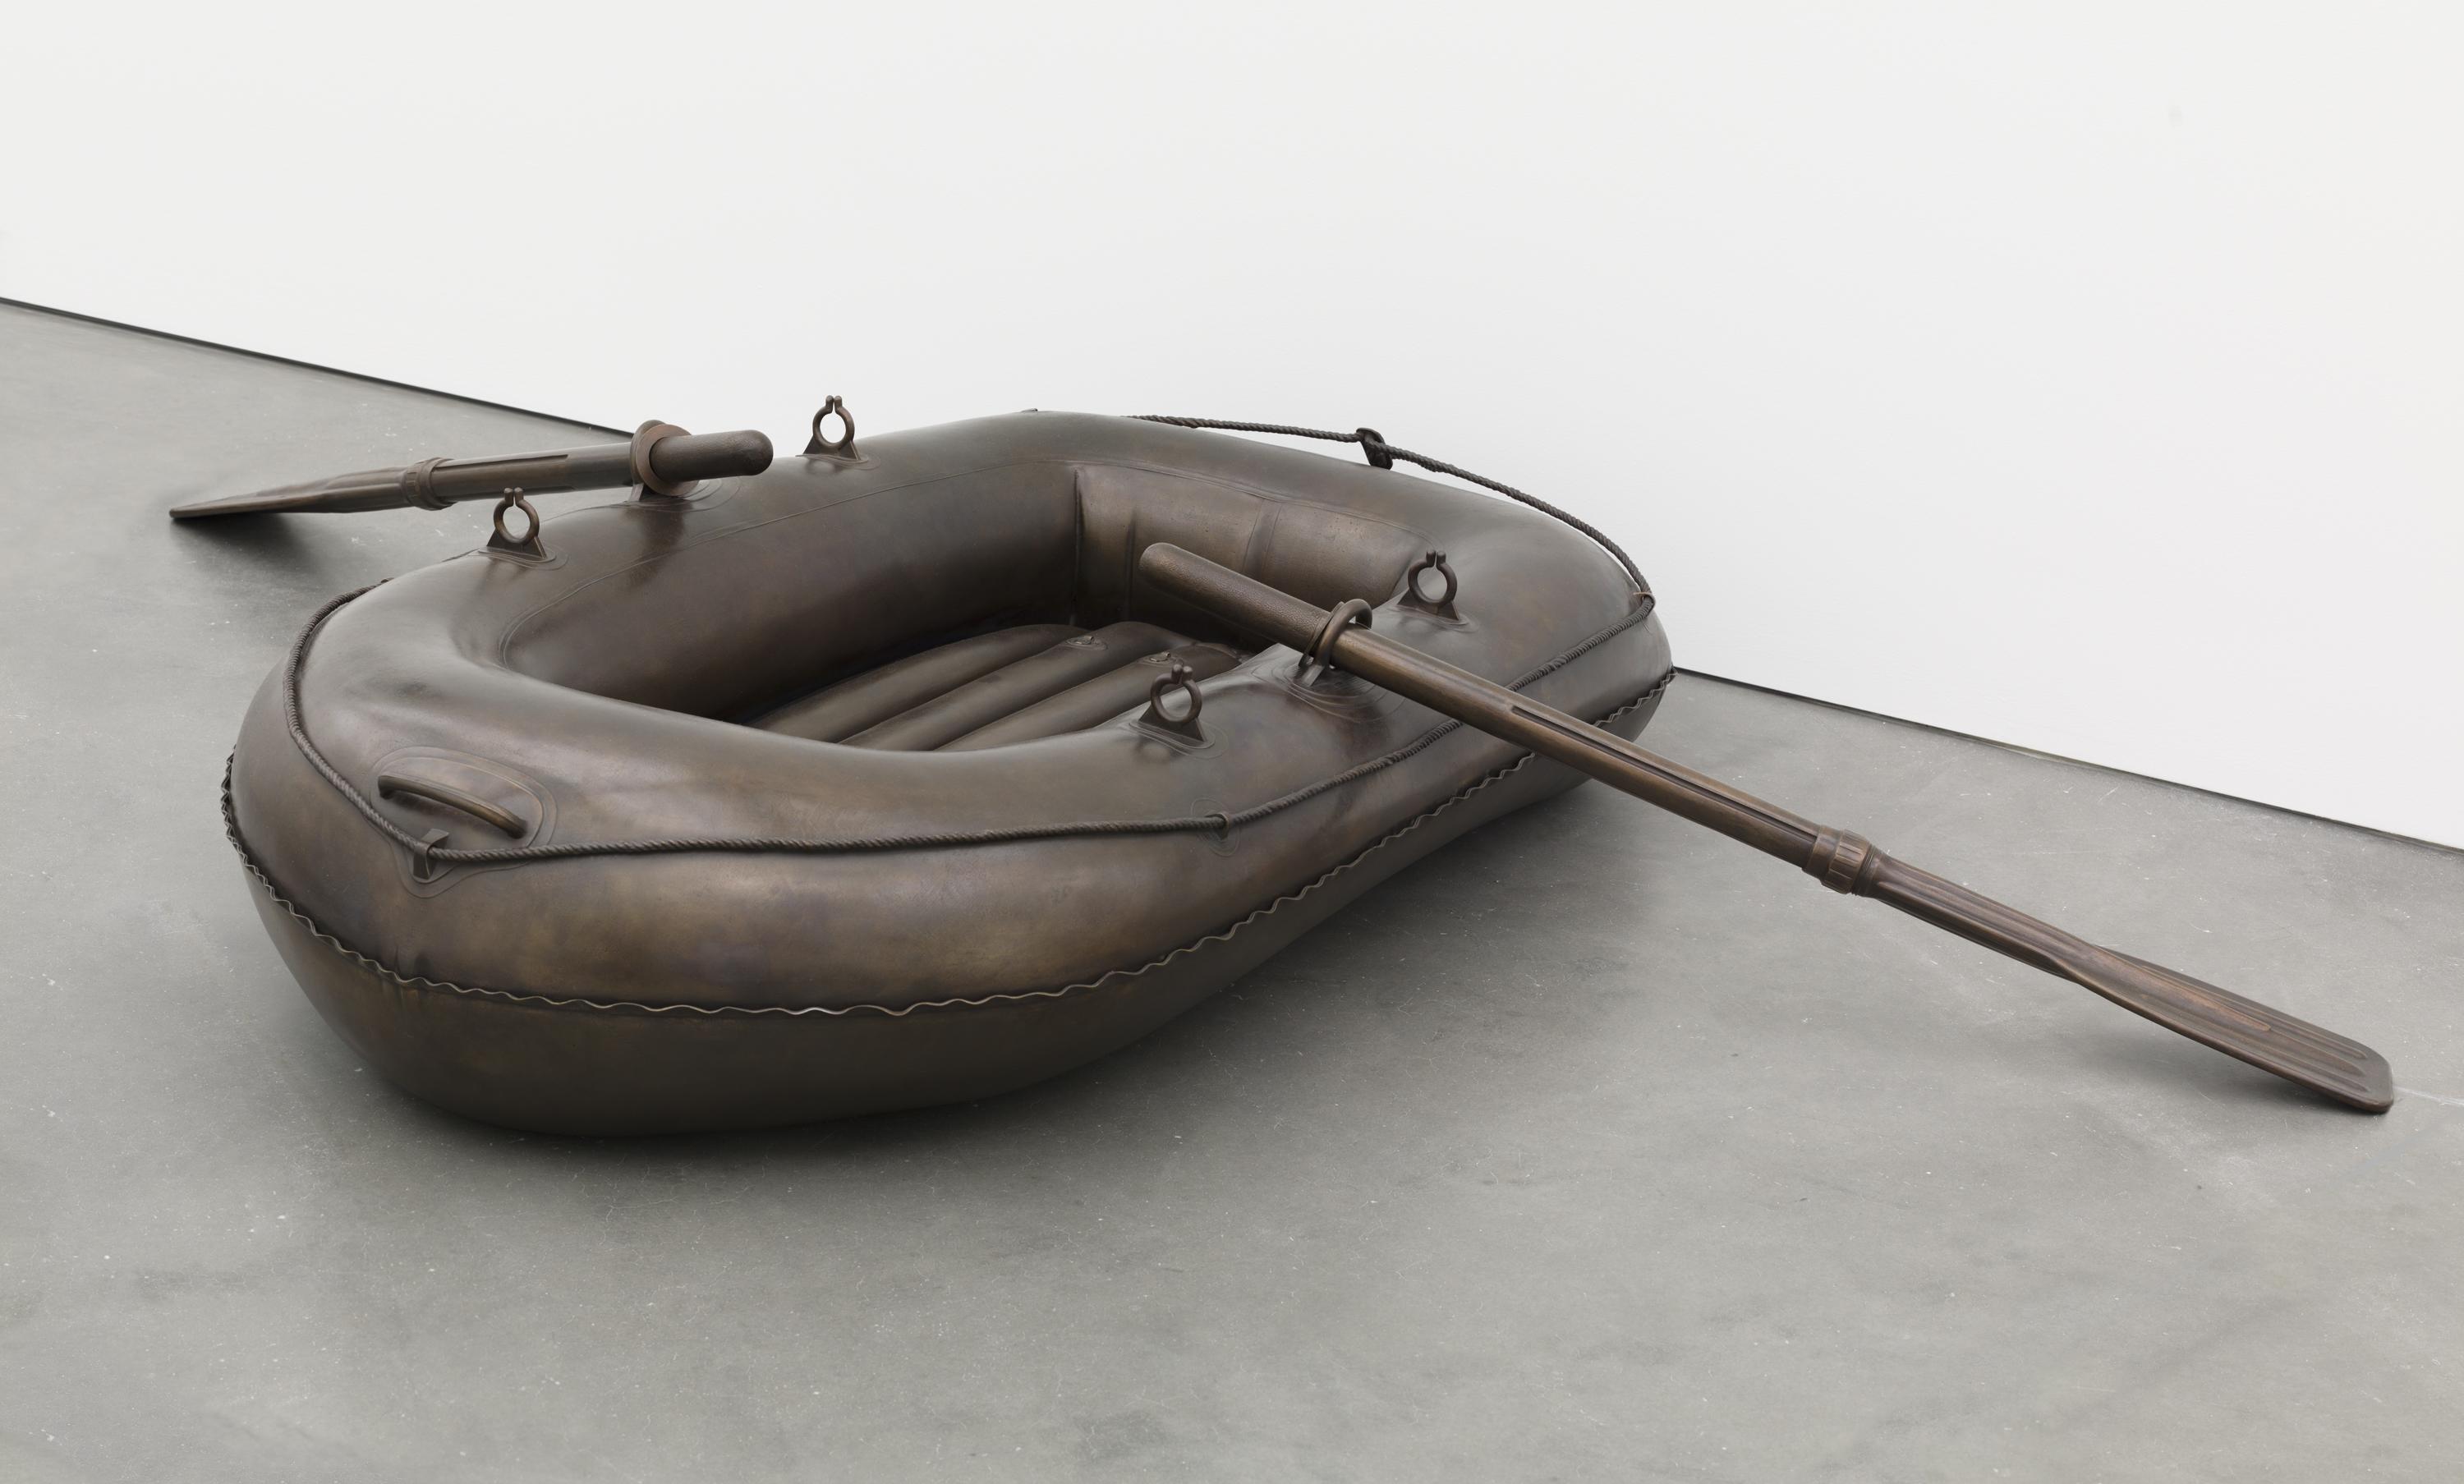 A grey-brown inflatable raft with two oars rests on a grey floor.